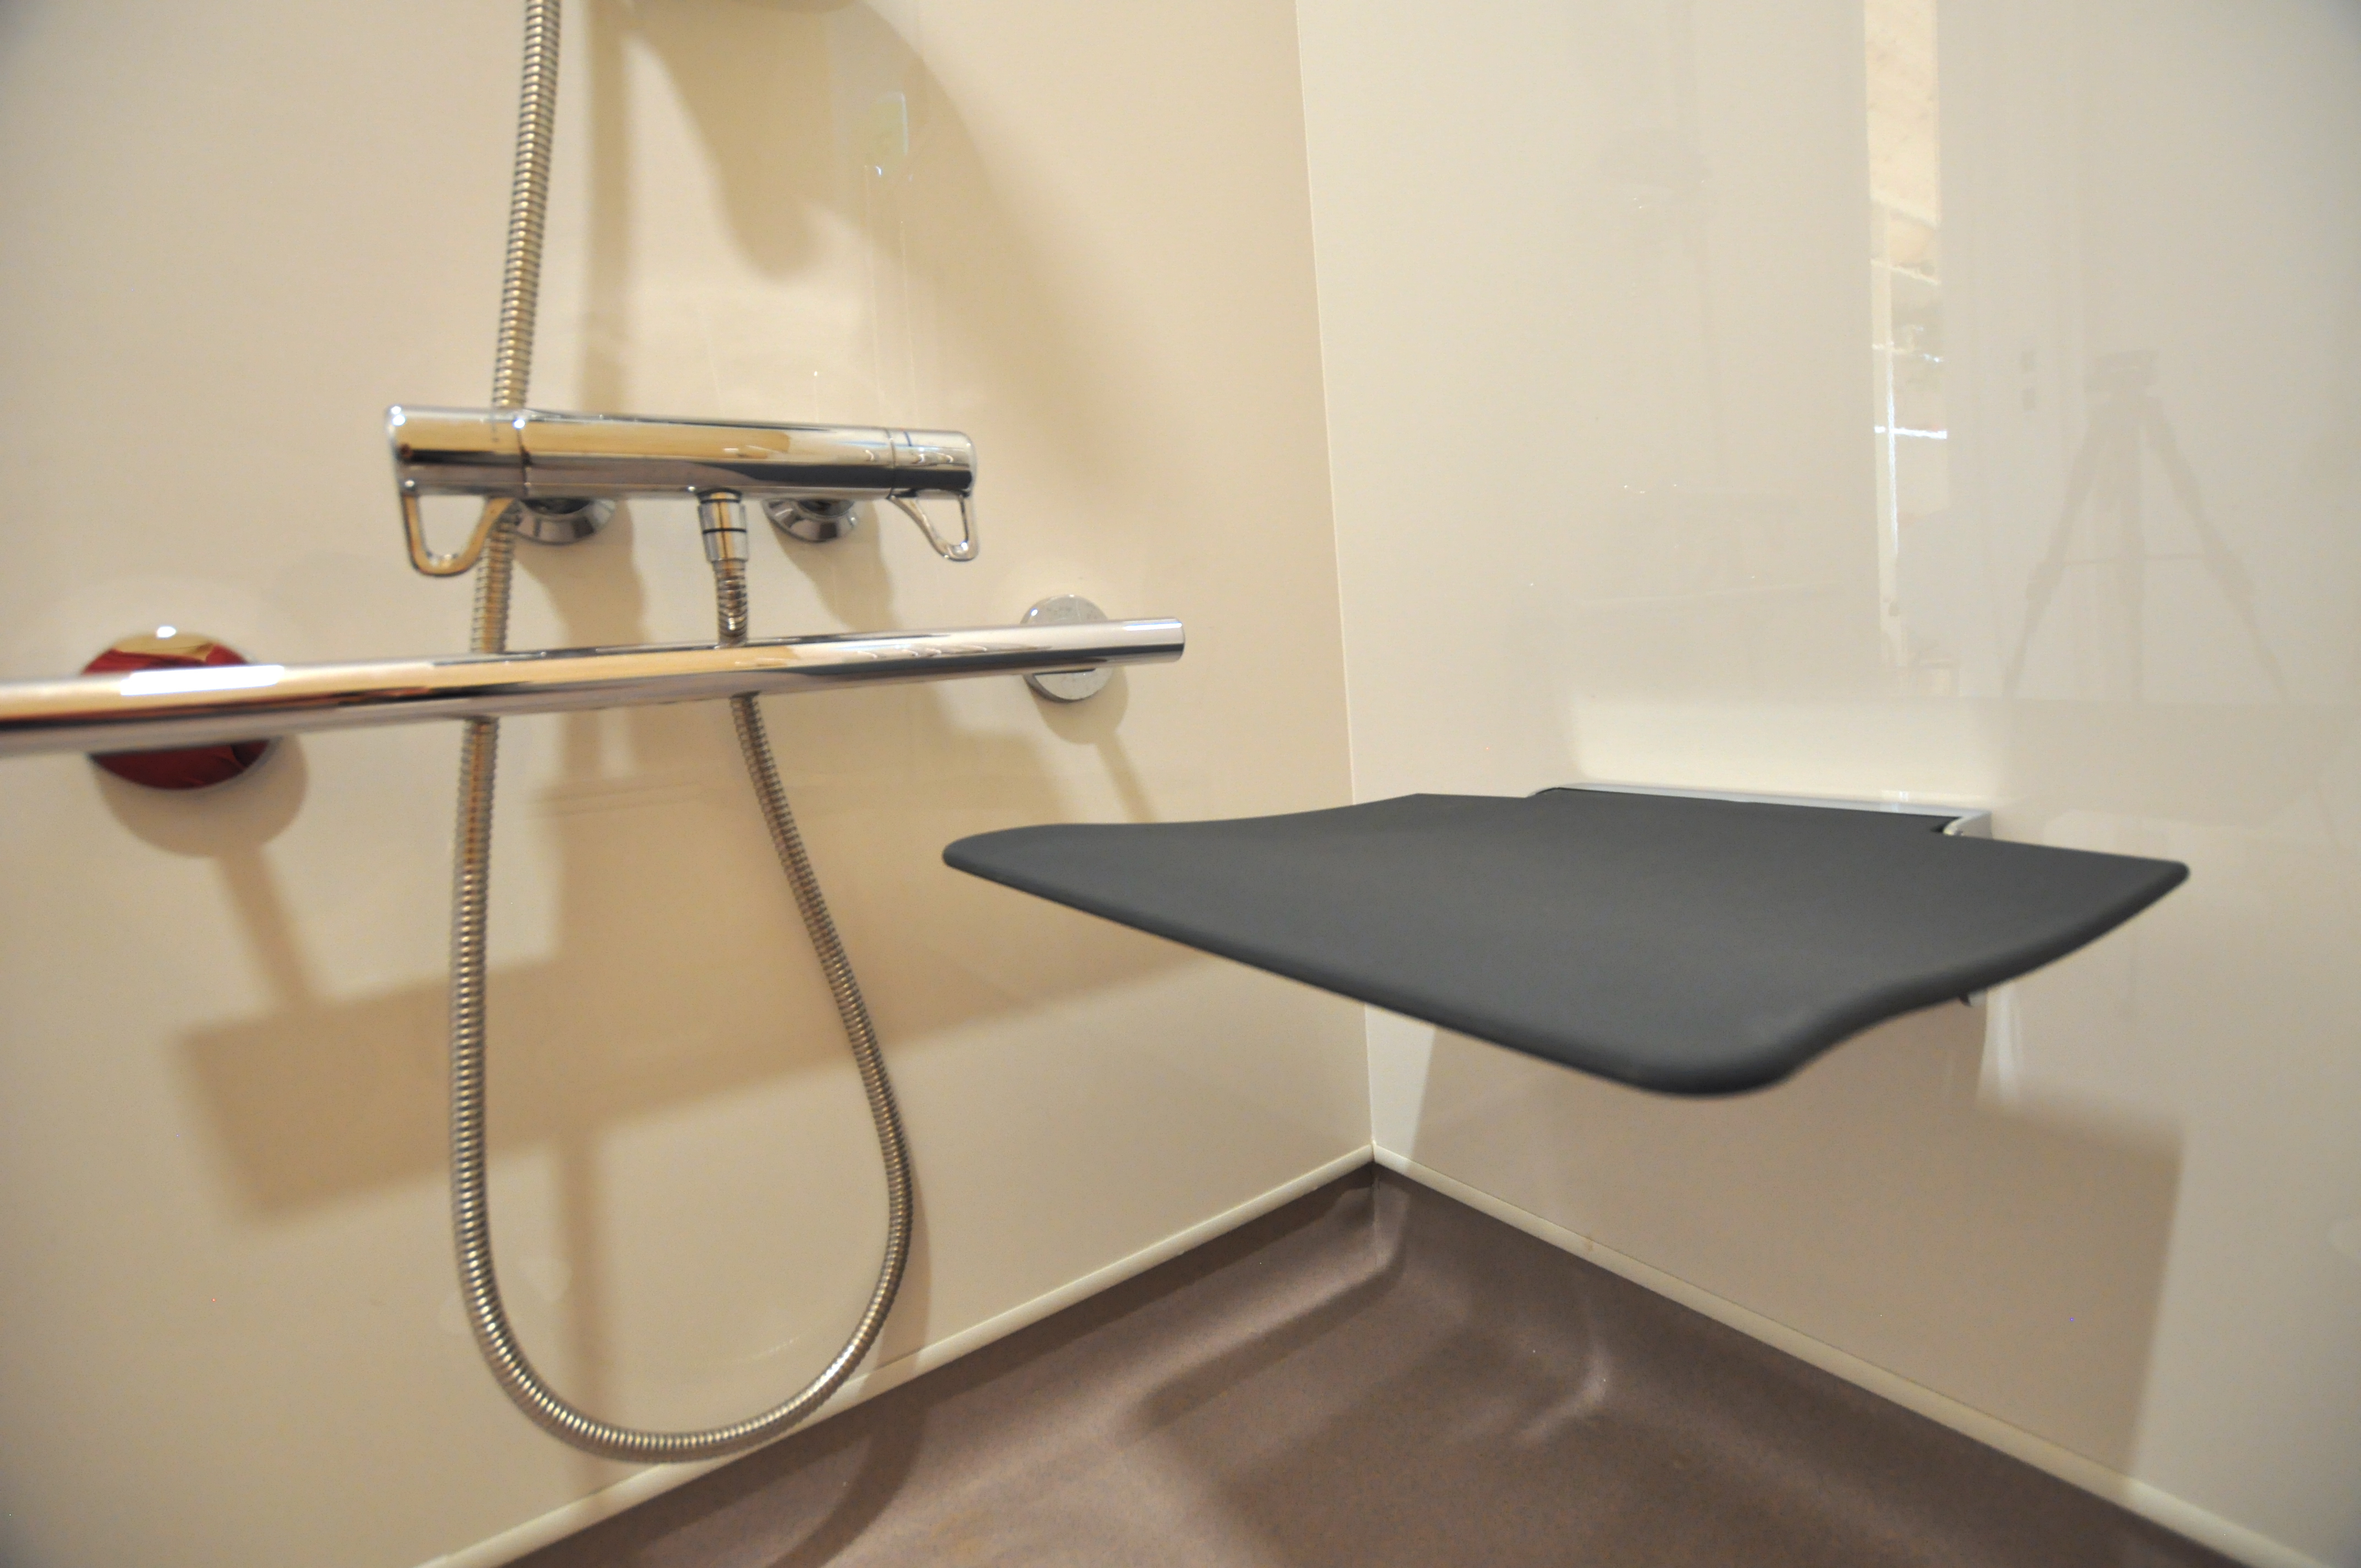 Accessible OmniPod bathroom featuring wall-mounted shower seat and grab rails.